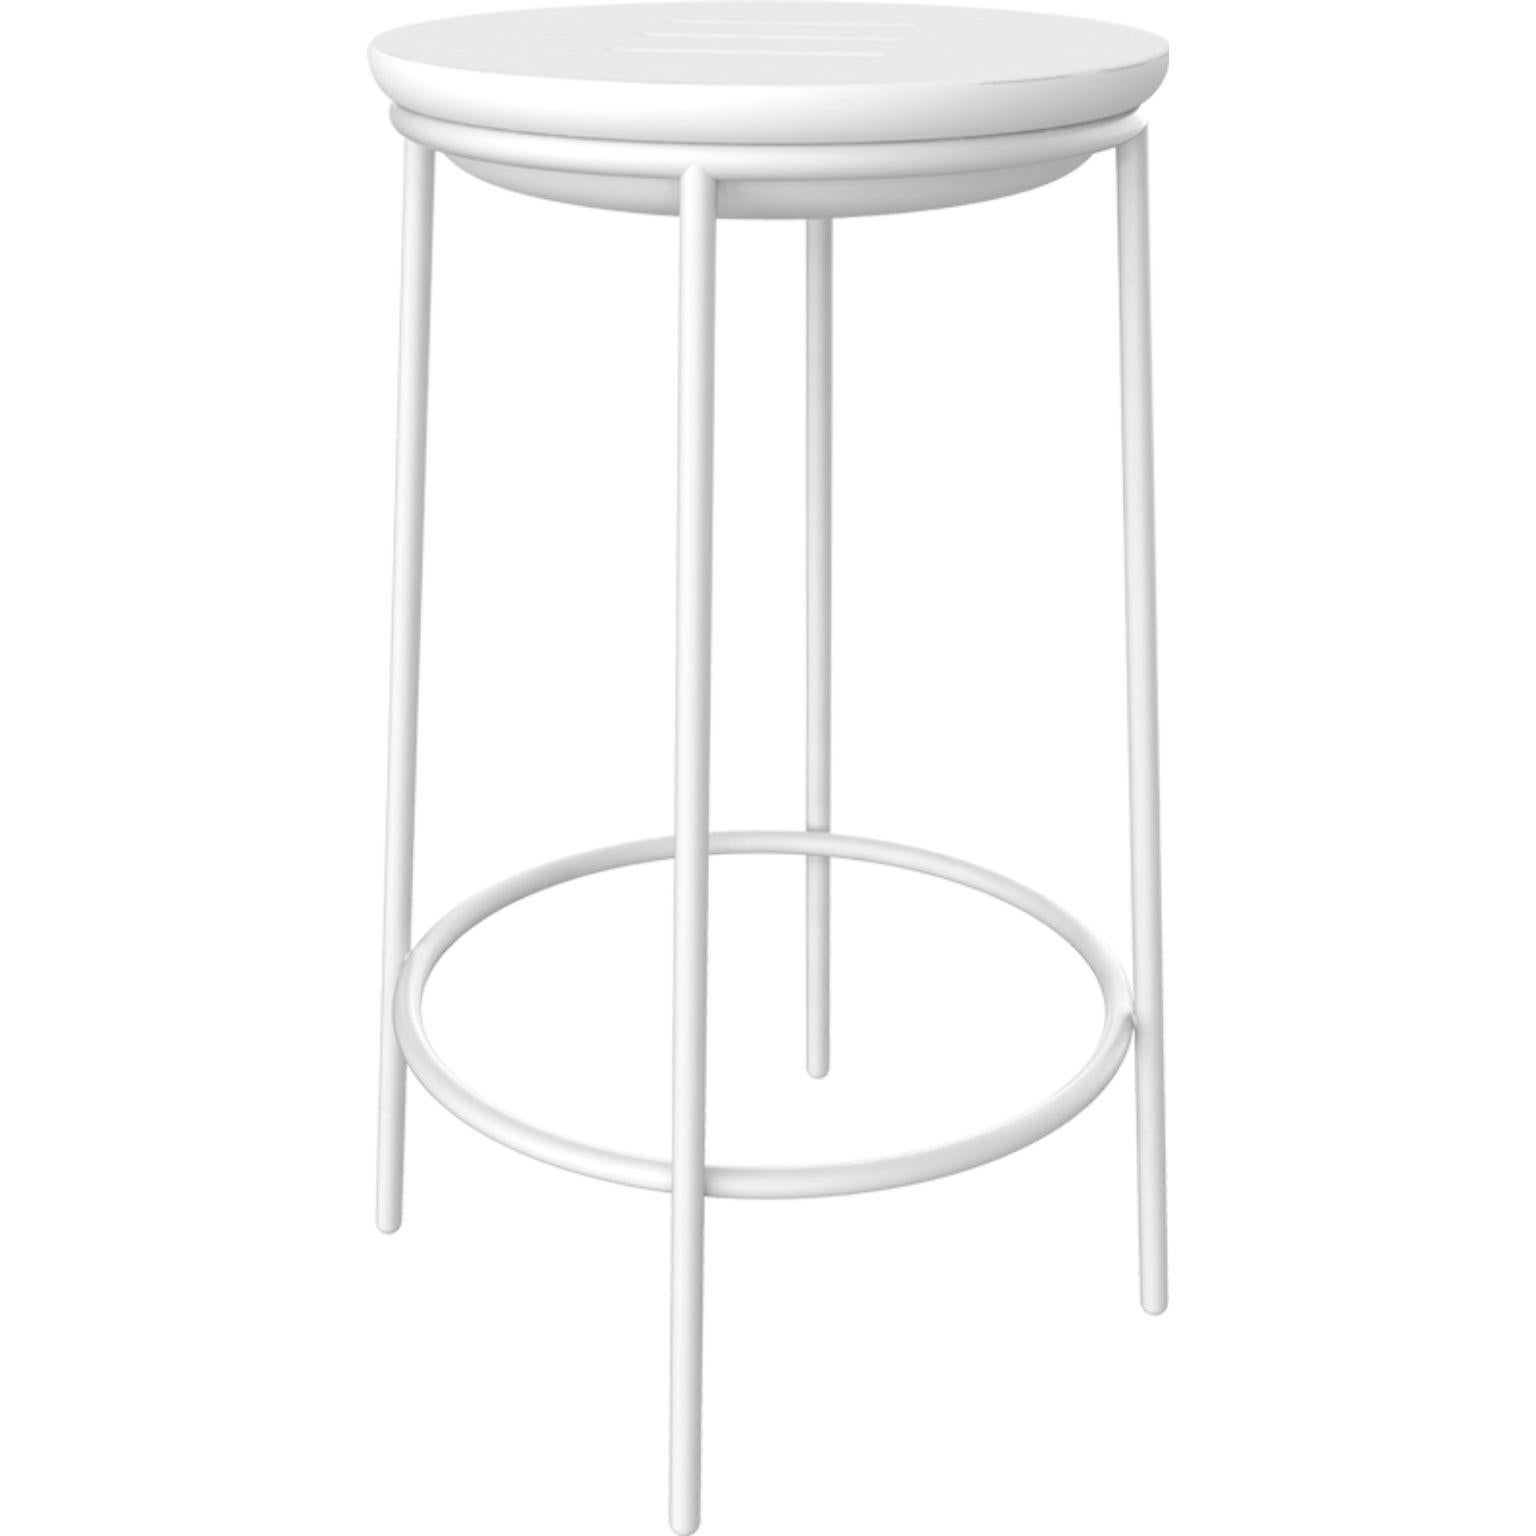 Lace white 60 high table by MOWEE
Dimensions: D75 x H111 cm
Material: Polyethylene and stainless steel
Weight: 10.5 kg
Also available in different colors and finishes. 

Lace is a collection of furniture made by rotomoulding. Its shape